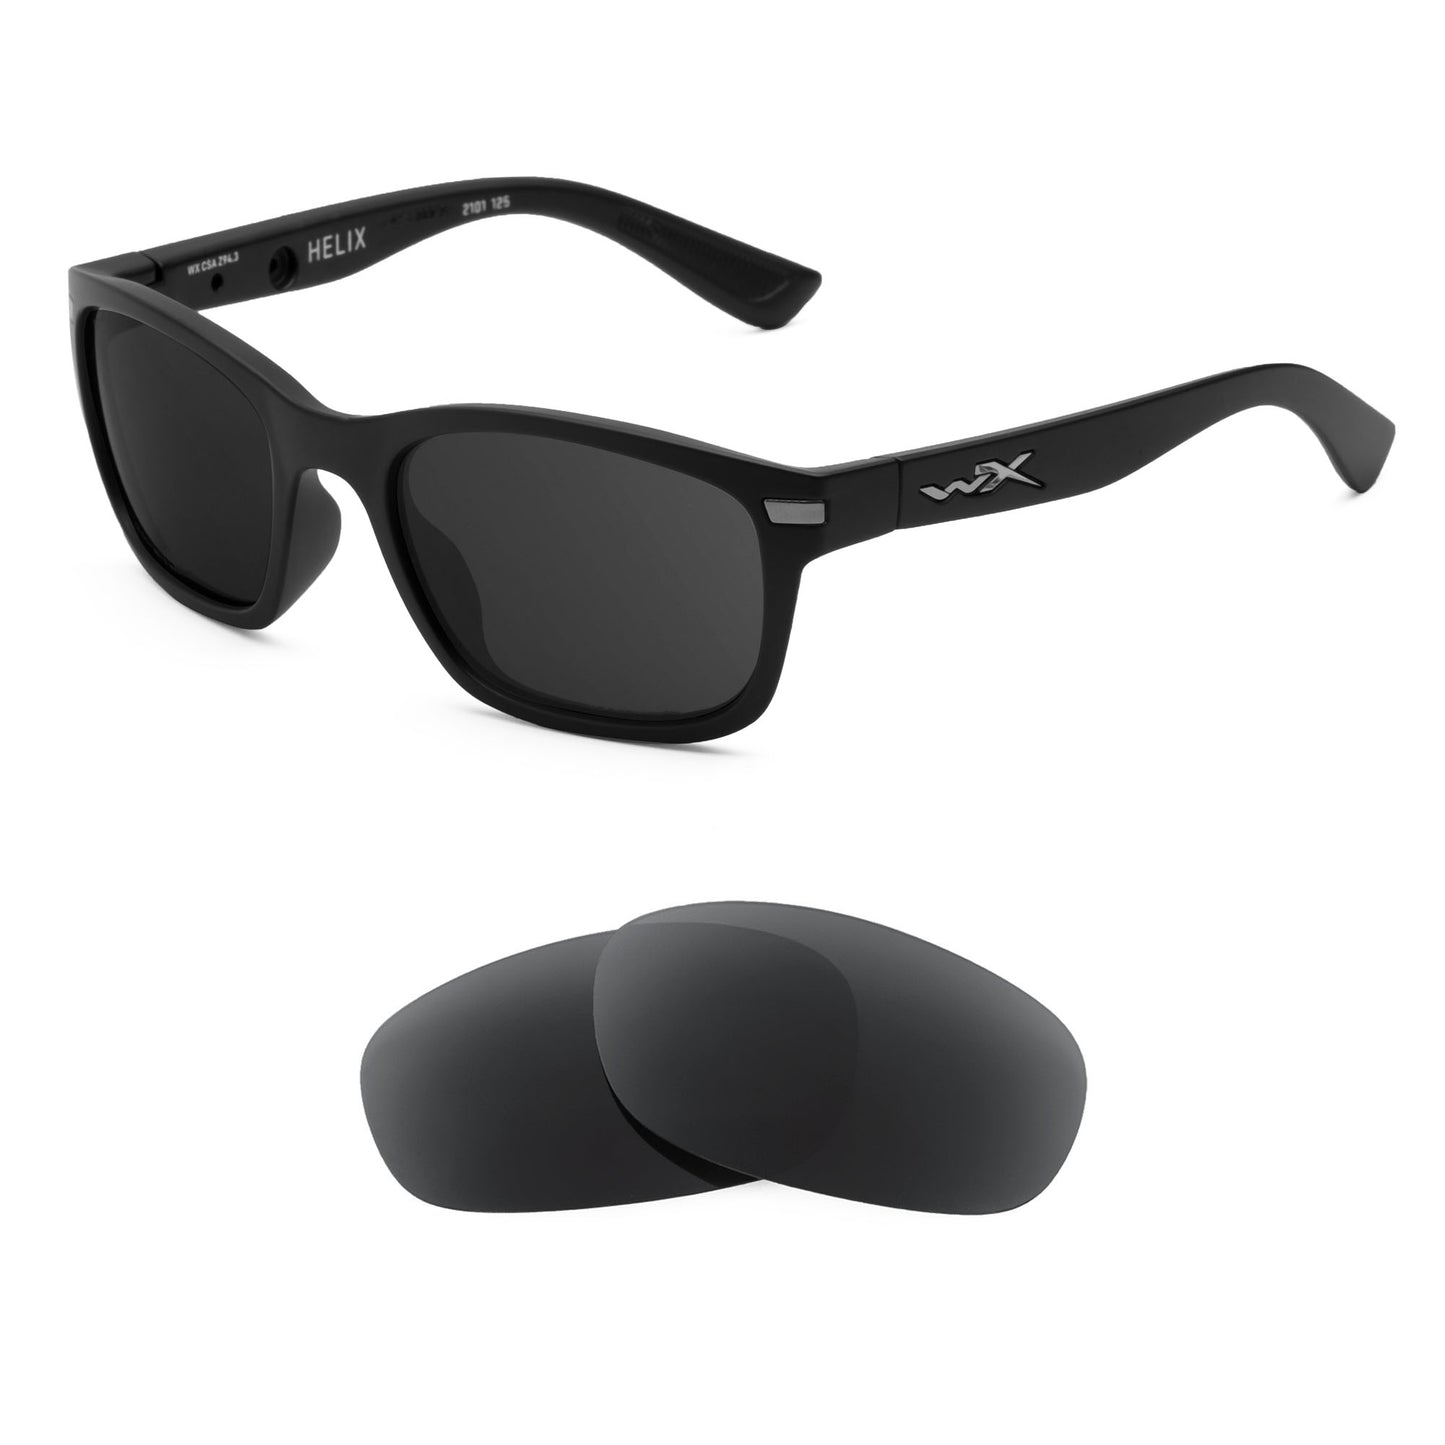 Wiley X Helix sunglasses with replacement lenses